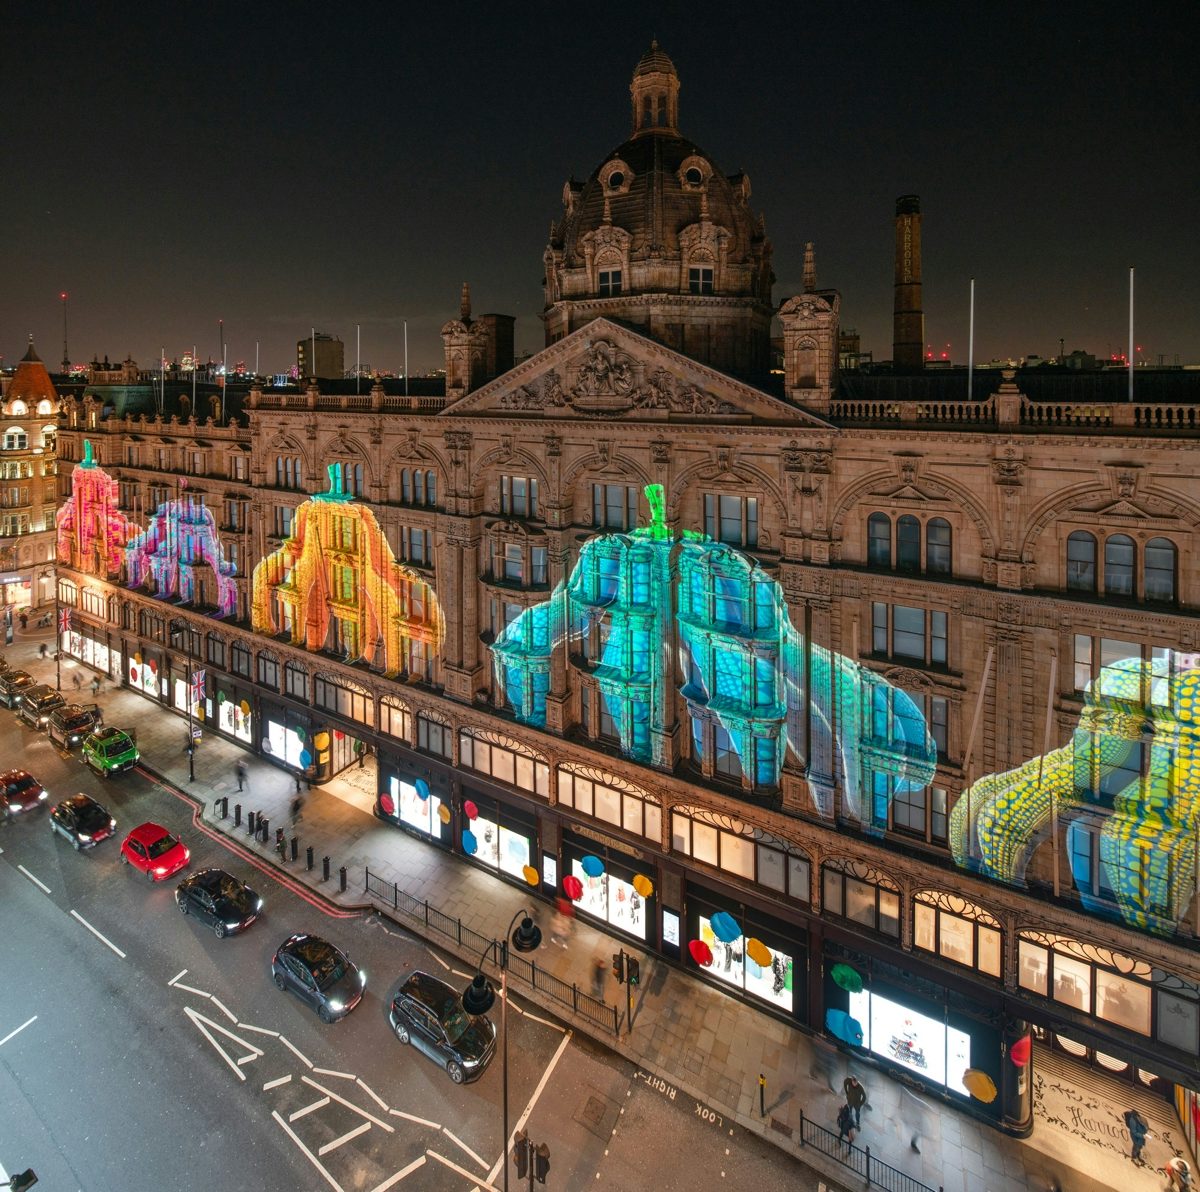 Harrods covered with dots for latest Louis Vuitton x Kusama